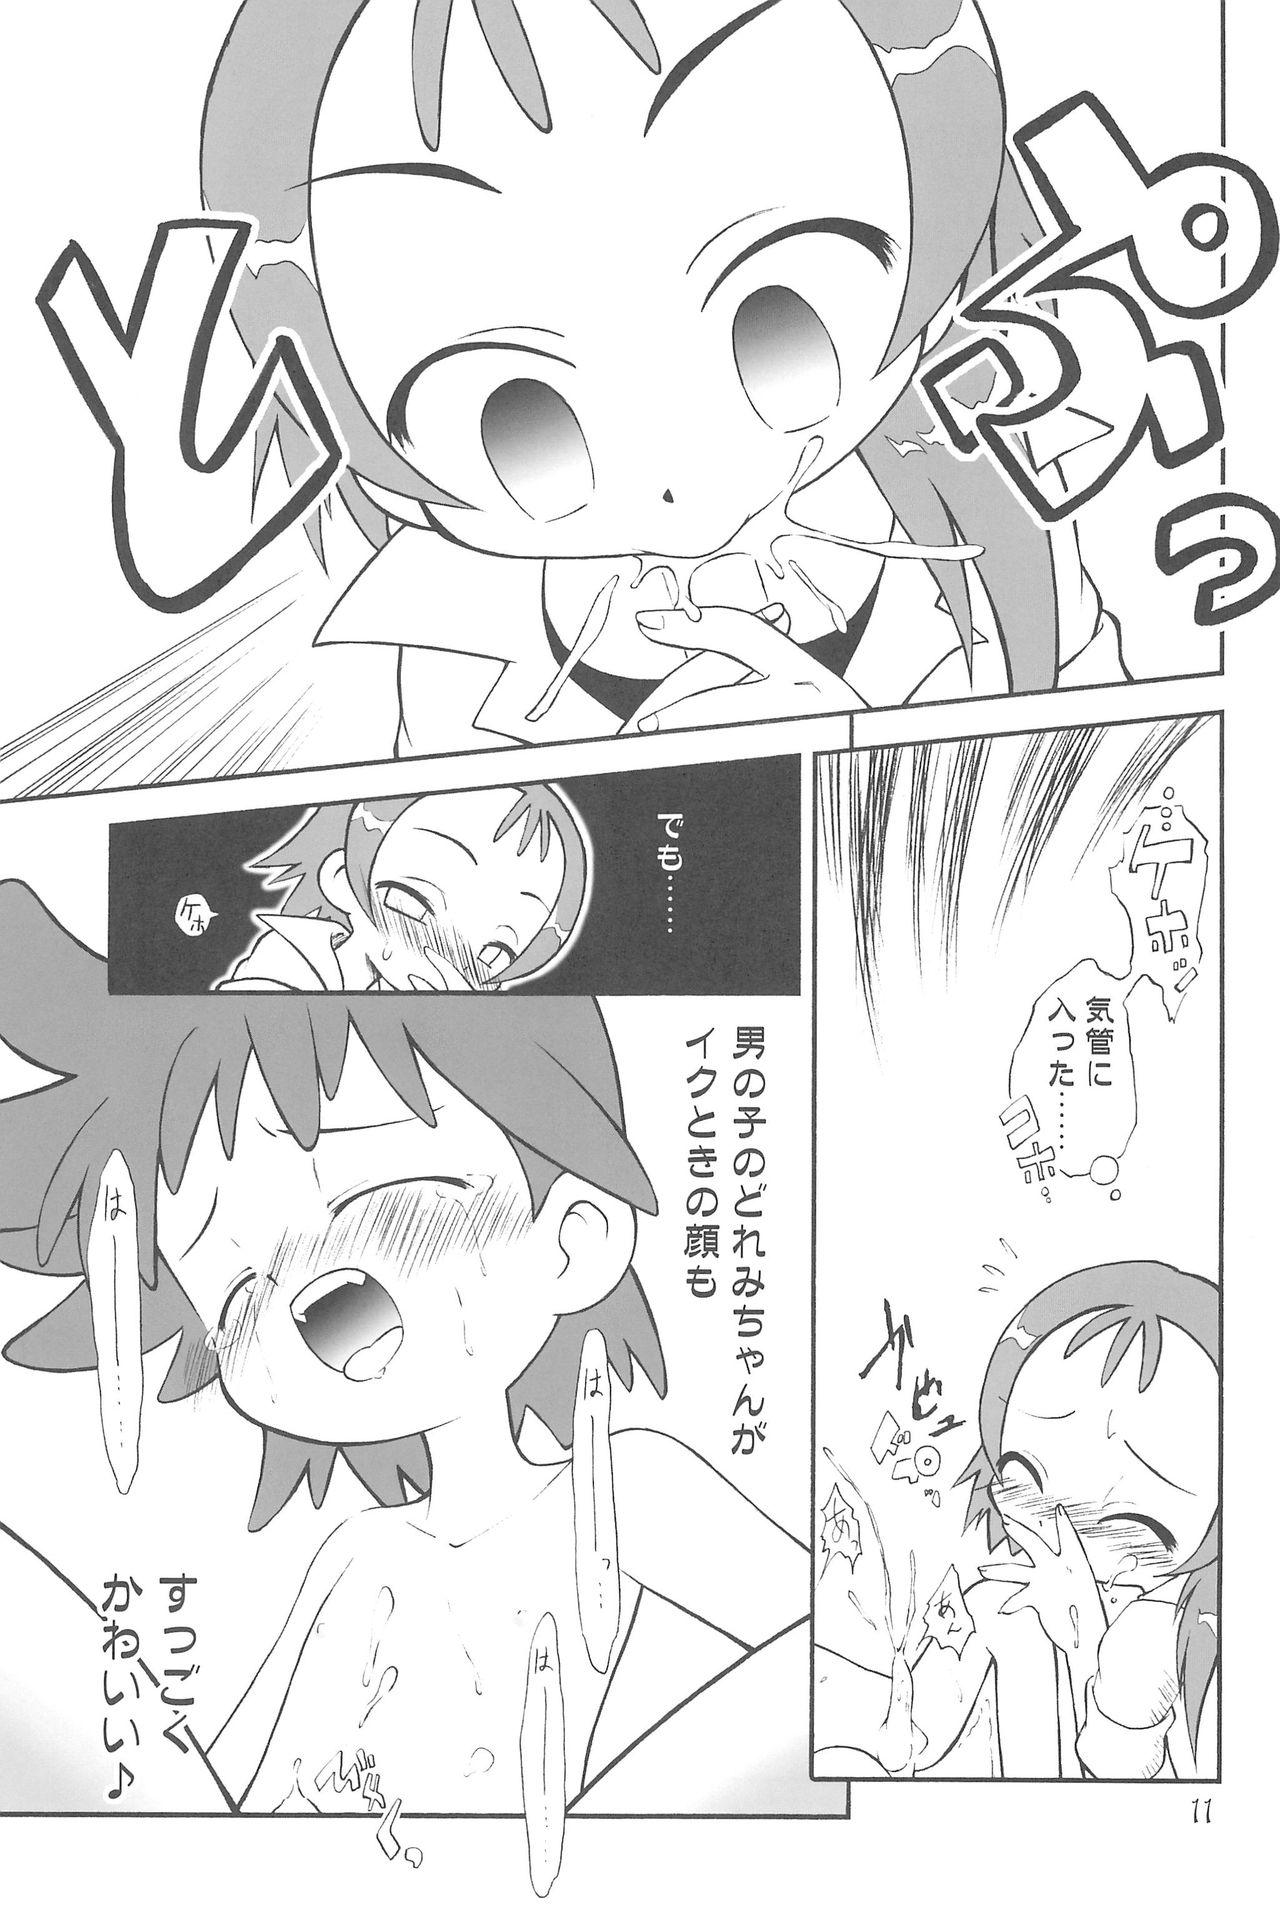 Fun Witch’s Song Plus - Ojamajo doremi Gay Group - Page 11